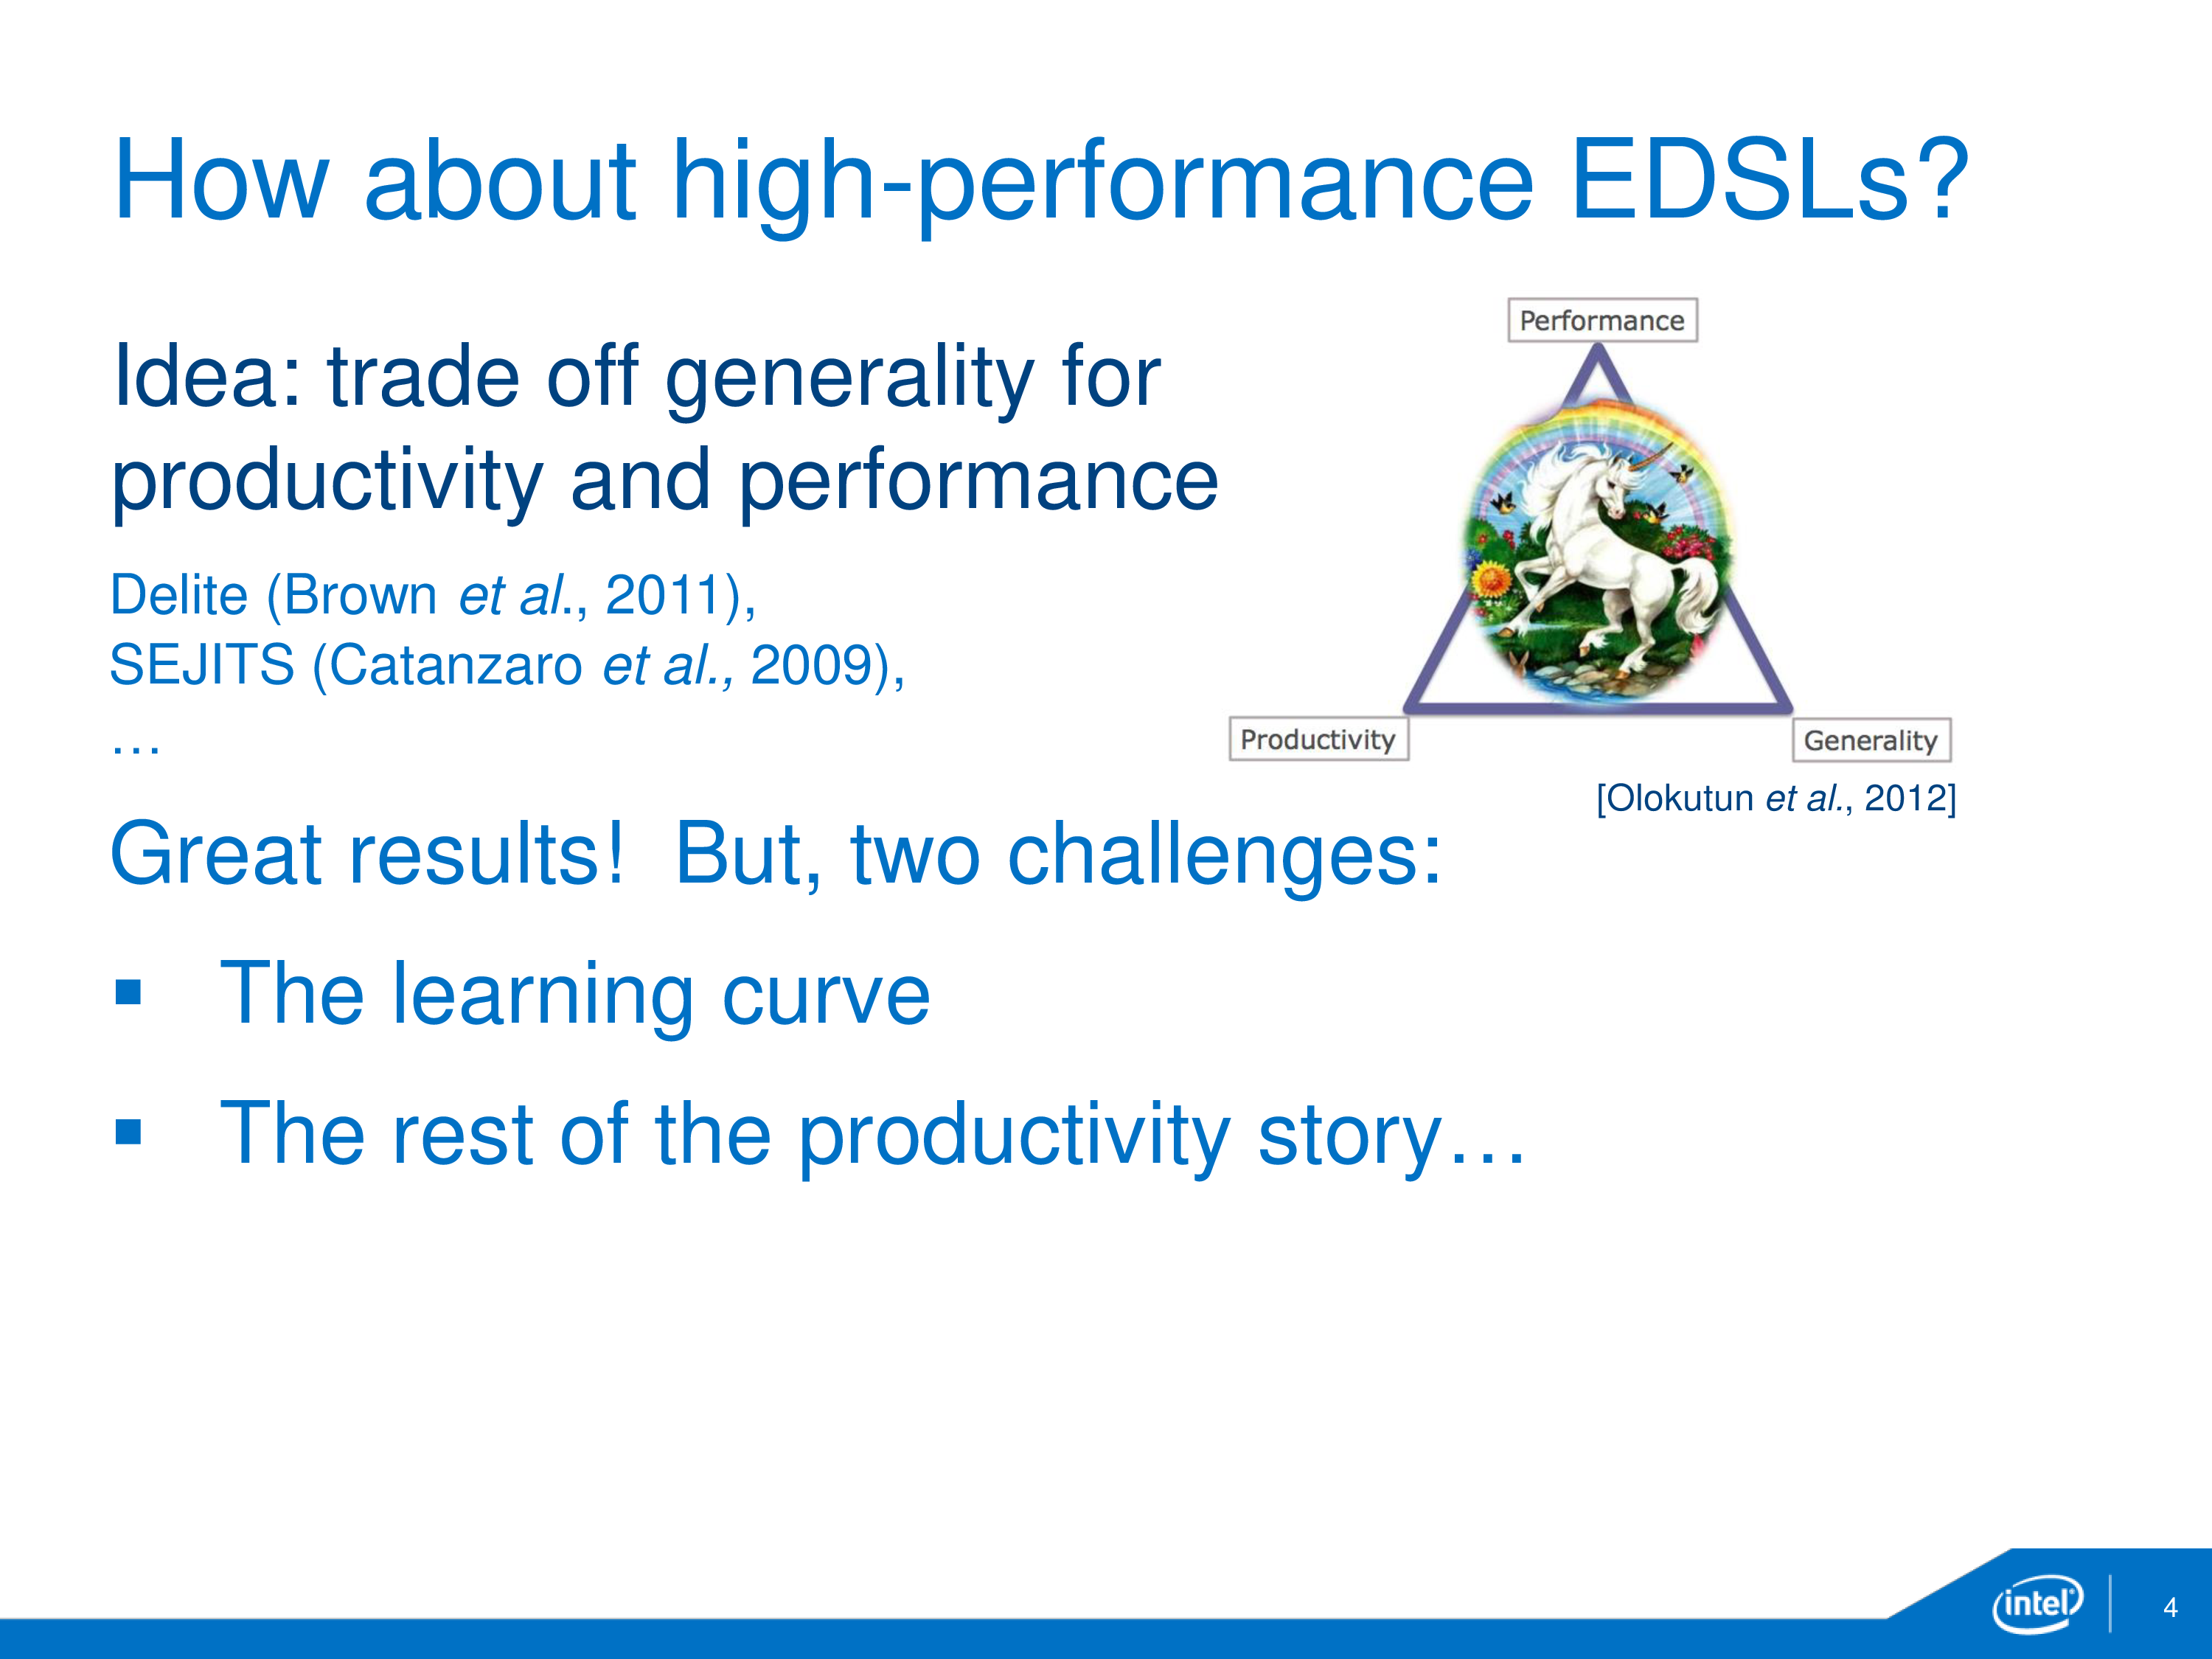 How about high-performance EDSLs? Idea: trade off generality for productivity and performance. Delite (Brown et al., 2011), SEJITS (Catanzaro et al., 2009), ... . Great results! But, two challenges: The learning curve, and the rest of the productivity story...